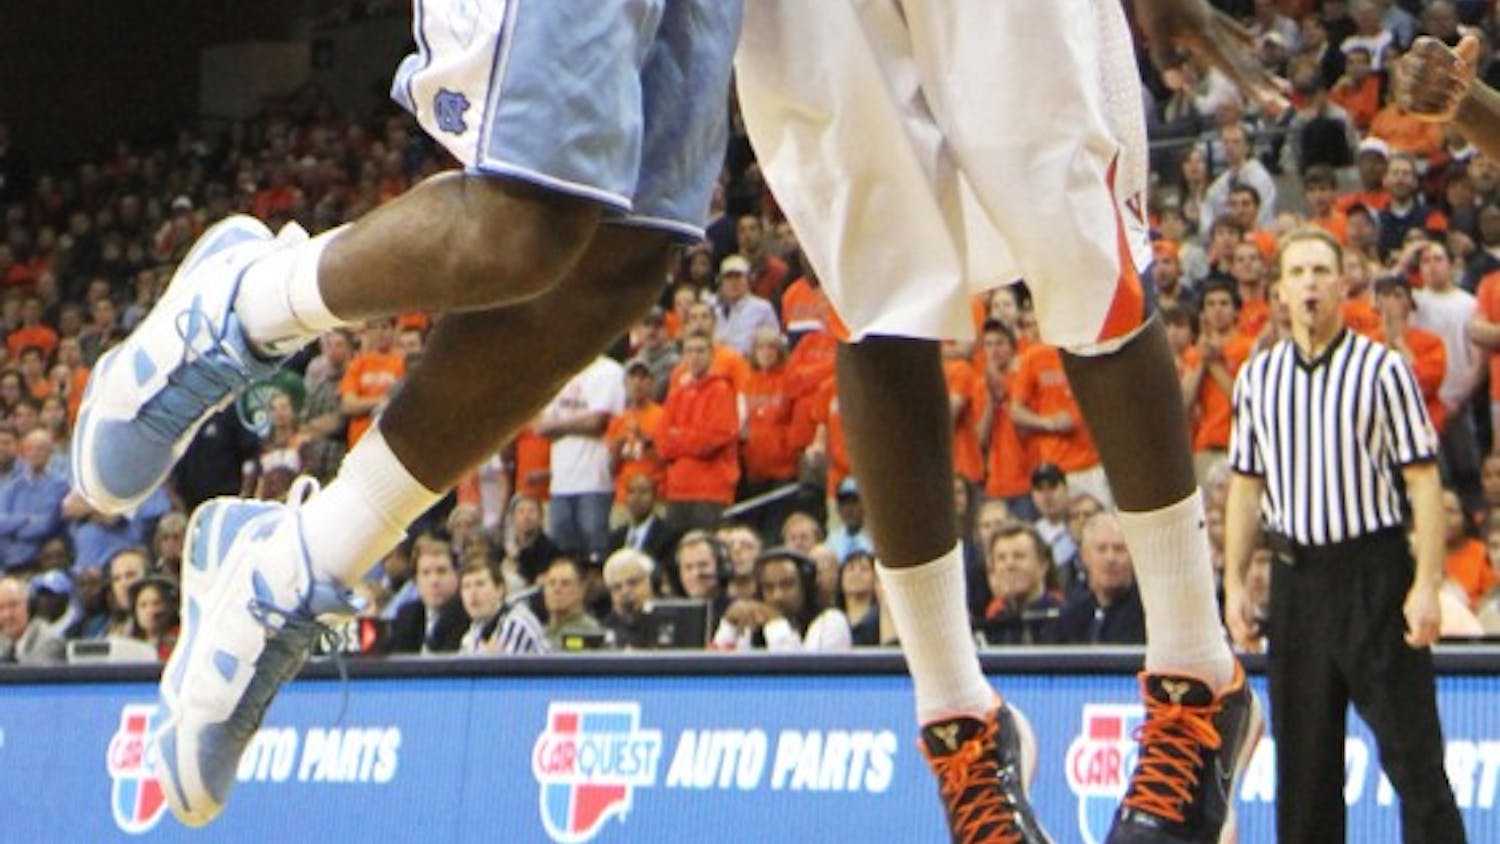 Justin Watts is stuffed by Virginia’s KT Harrell, but the Tar Heels managed to rally for a 62-56 victory. Though Harrell led all scorers with 13 points, both teams shot below 27 percent in the second period.